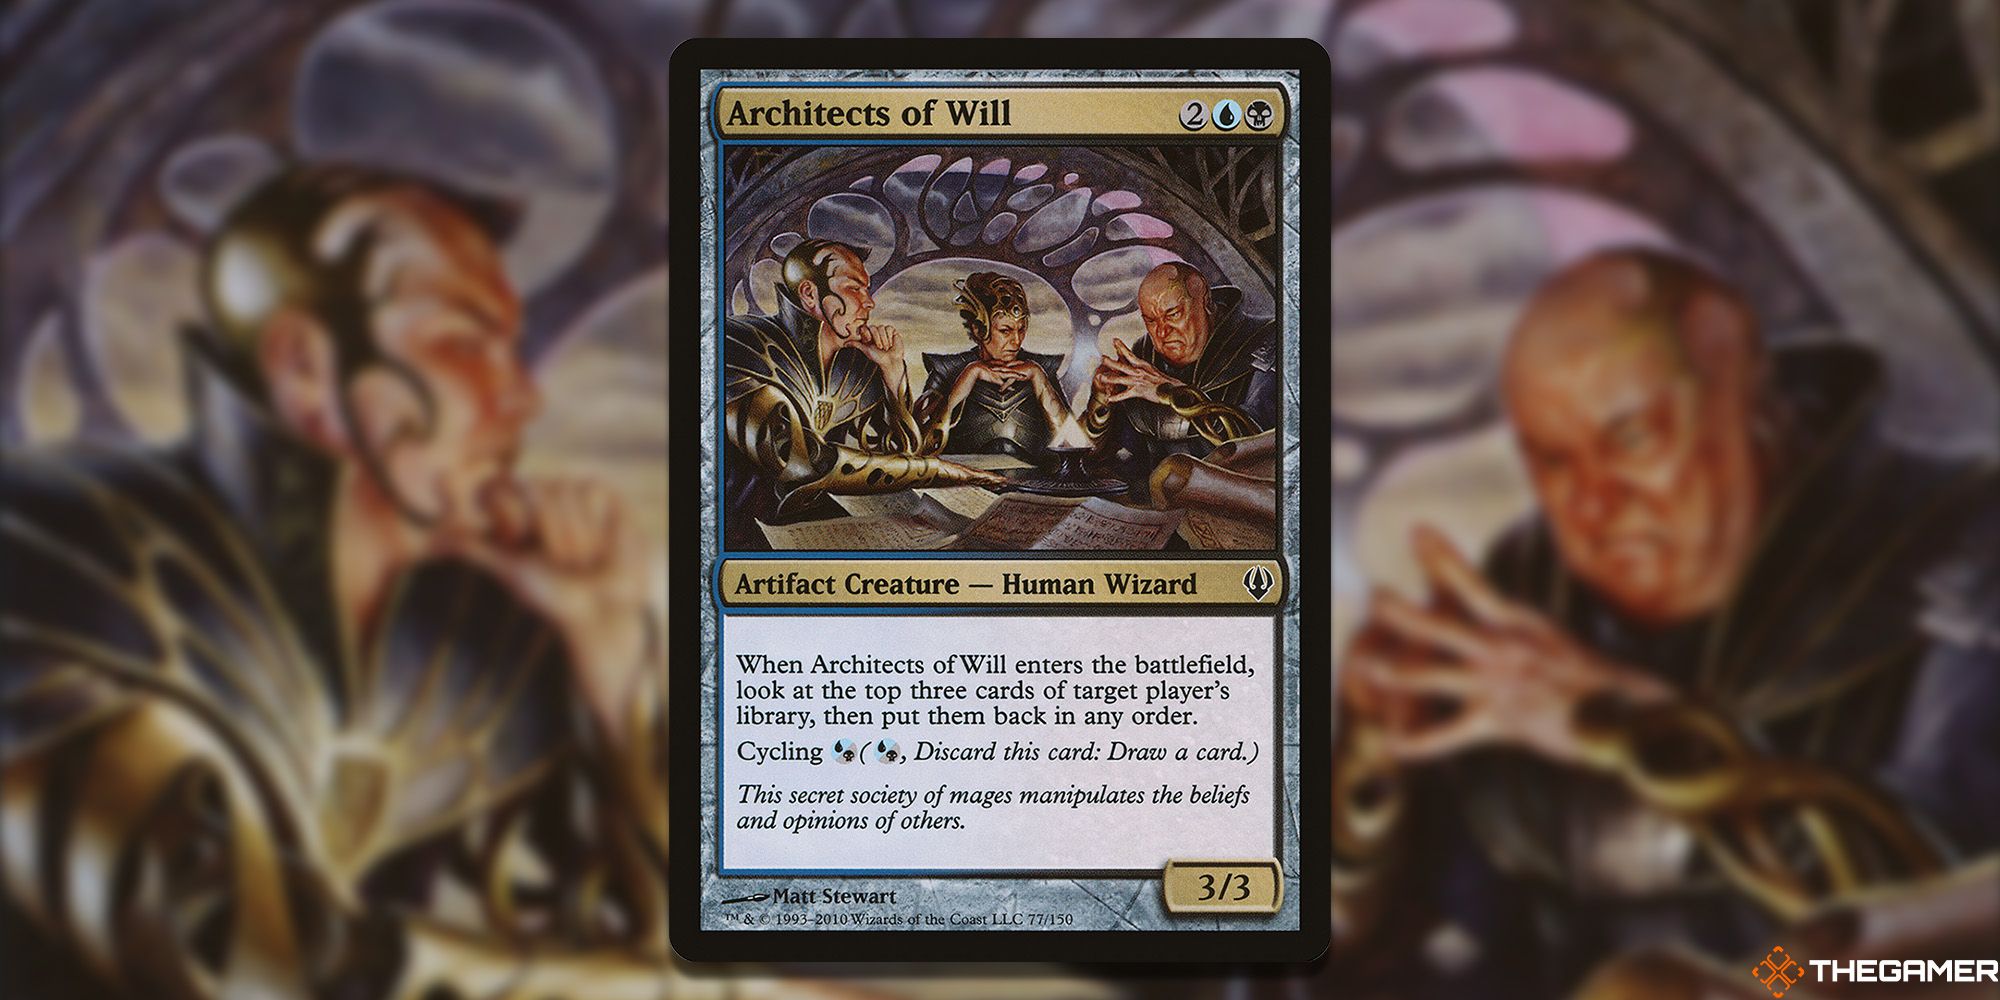 Picture of Architects of Will card